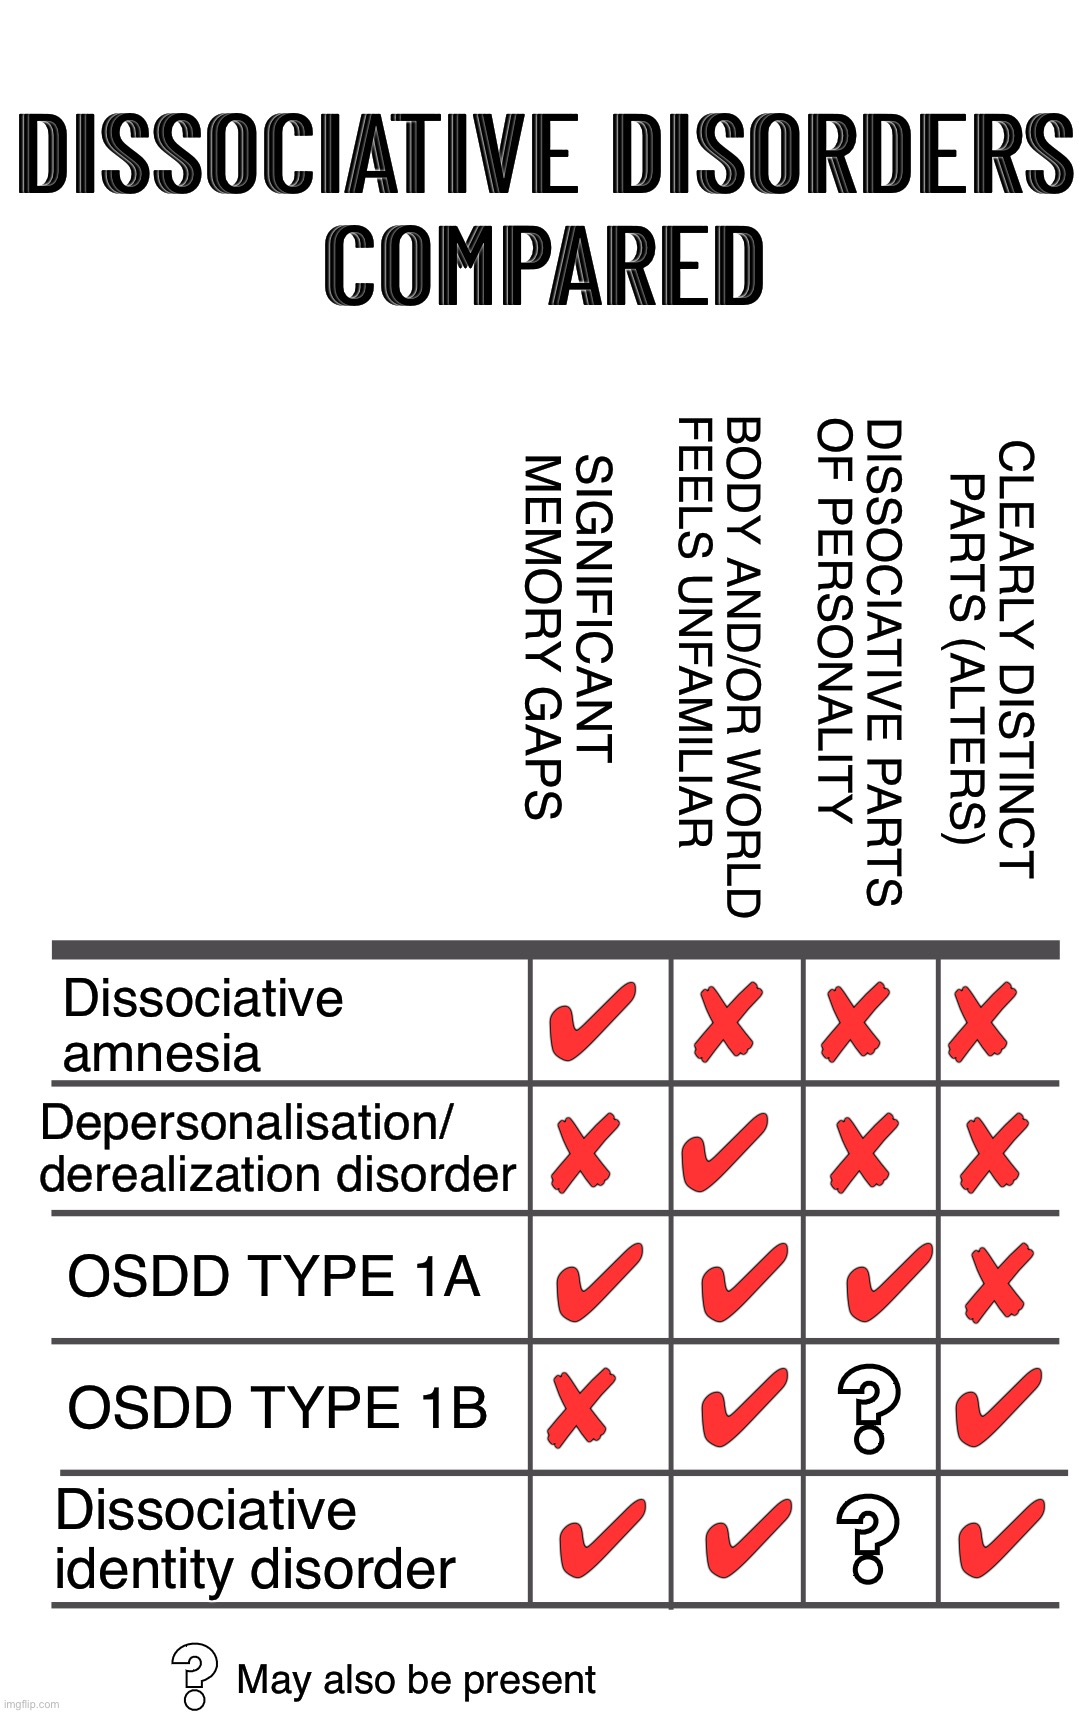 Dissociative disorders including DID, OSDD1a, ISDD1b symptoms and differences | DISSOCIATIVE DISORDERS
COMPARED; BODY AND/OR WORLD
FEELS UNFAMILIAR; SIGNIFICANT
MEMORY GAPS; CLEARLY DISTINCT PARTS (ALTERS); DISSOCIATIVE PARTS
OF PERSONALITY; Dissociative amnesia; ✔︎  ✘  ✘  ✘; ✘   ✔︎   ✘   ✘; Depersonalisation/
derealization disorder; OSDD TYPE 1A; ✔︎  ✔︎  ✔︎ ✘; OSDD TYPE 1B; ? ✘   ✔︎      ✔︎; ✔︎  ✔︎      ✔︎; ? Dissociative identity disorder; ? May also be present | image tagged in compare features grid,dissociative identity disorder,osdd,osdd1a,differences,compared | made w/ Imgflip meme maker